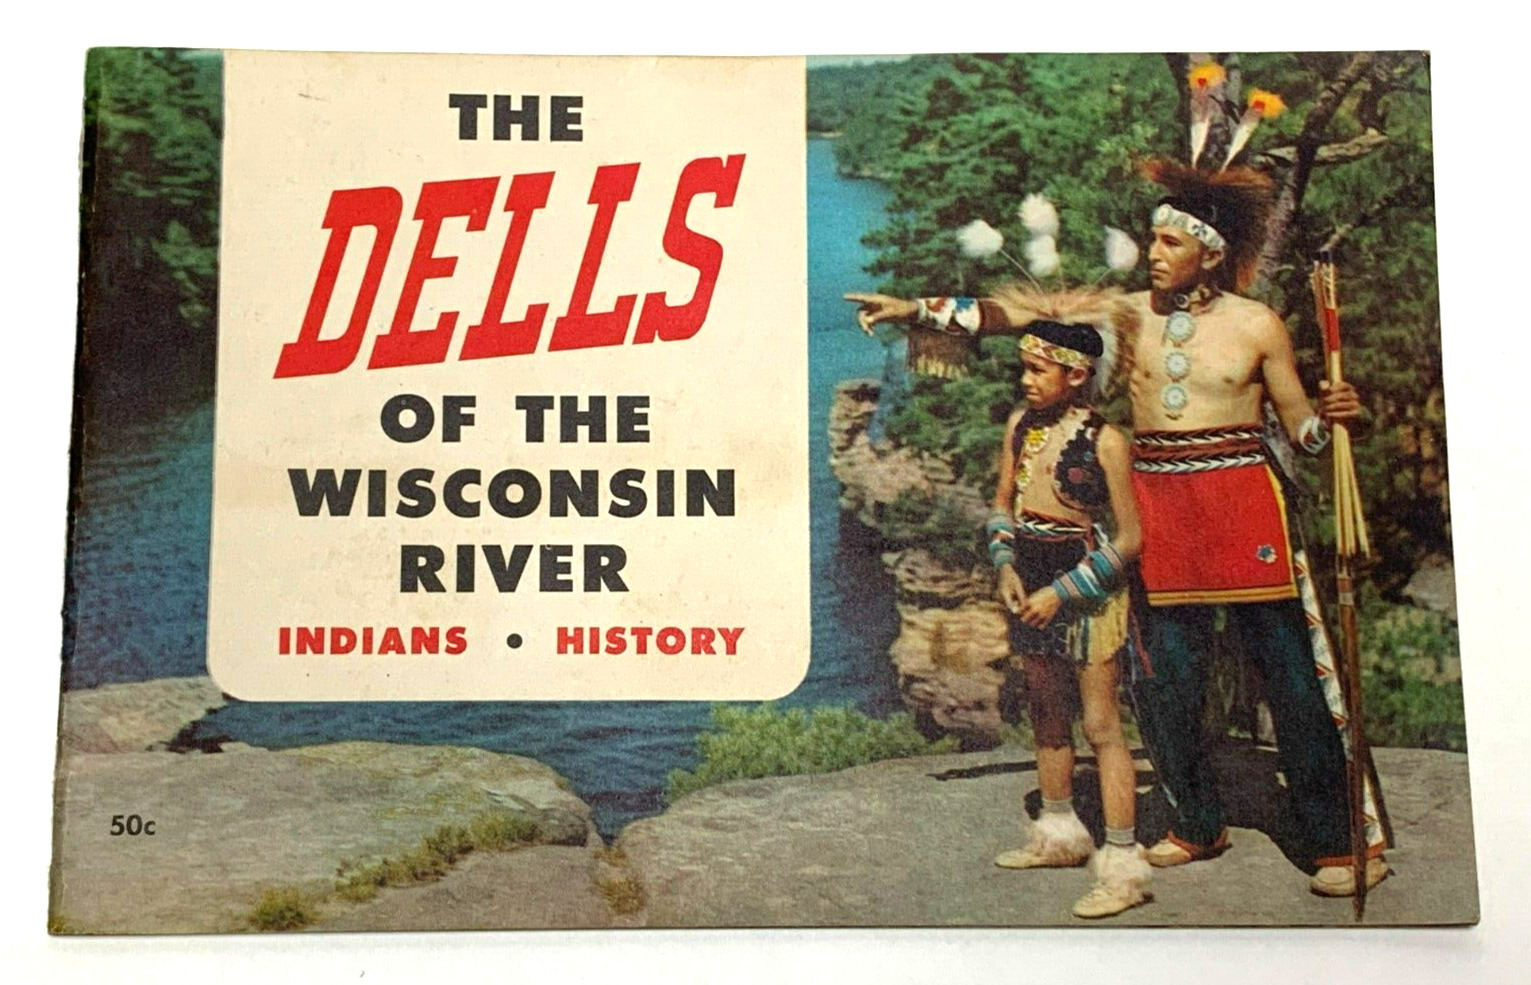 Vintage 1954 THE DELLS OF THE WISCONSIN RIVER Pamphlet Brochure EAU CLAIRE, WI